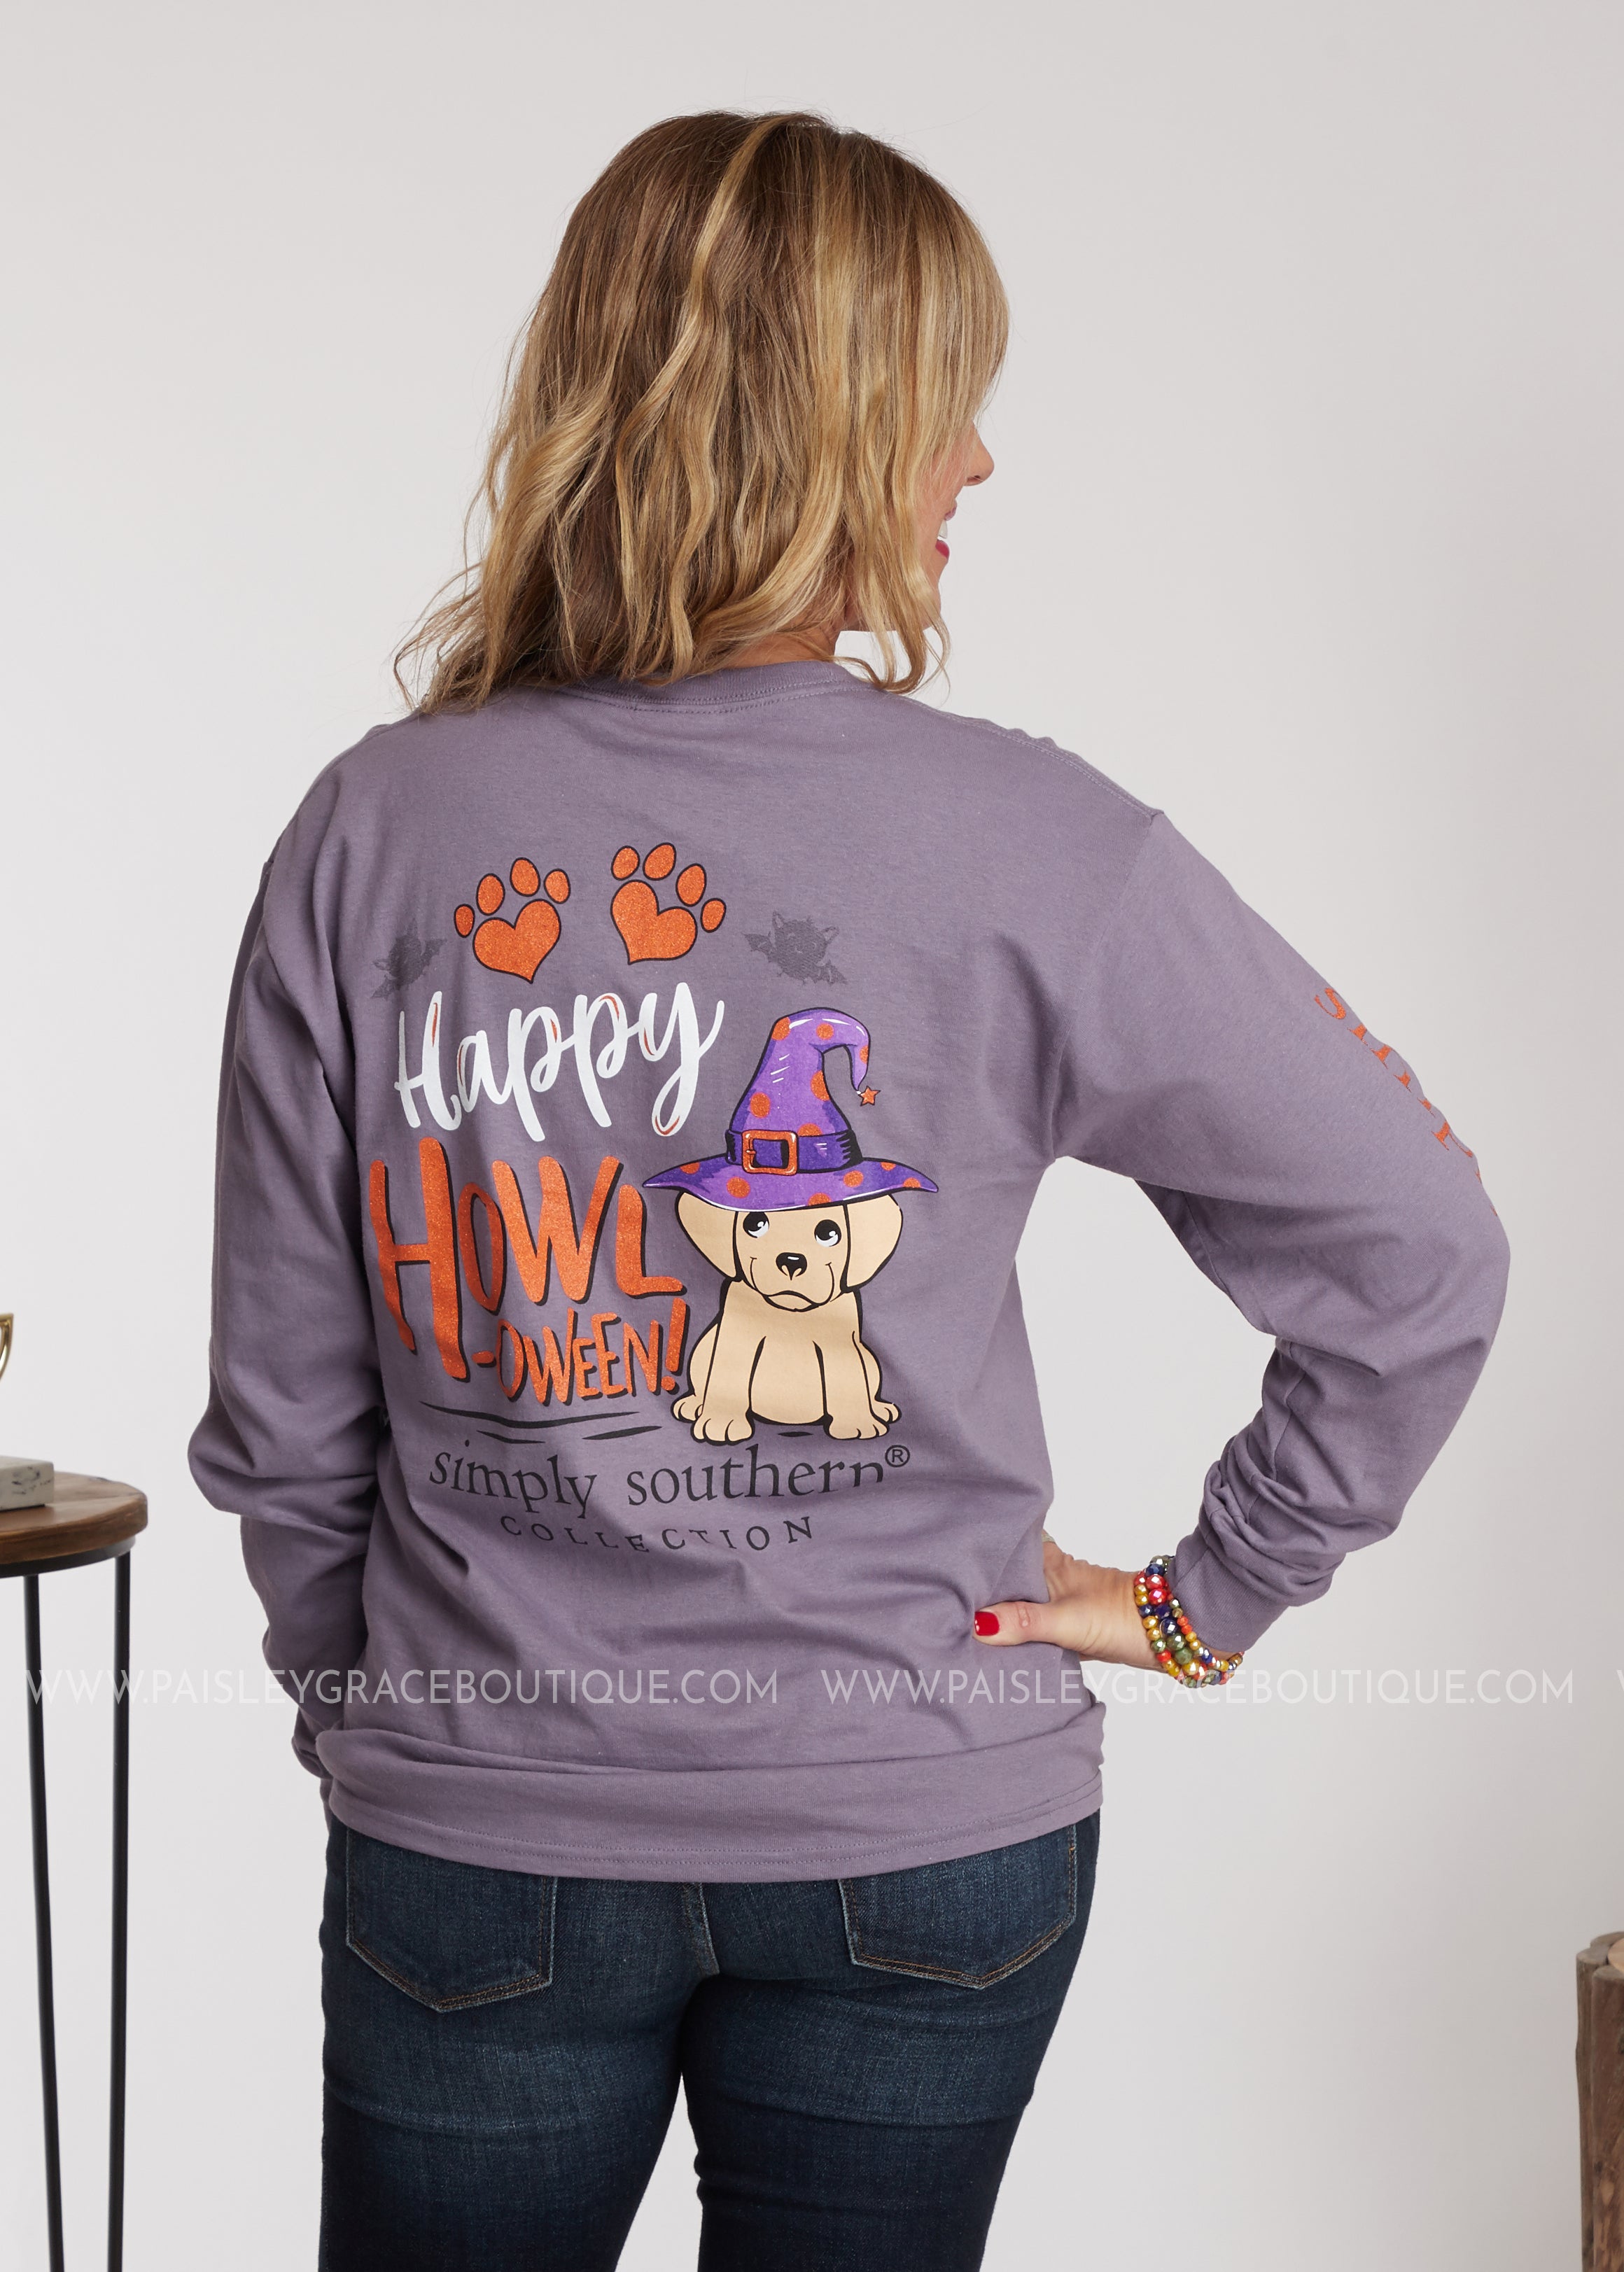 Happy Howl Oween By Simply Southern Final Sale Paisley Grace